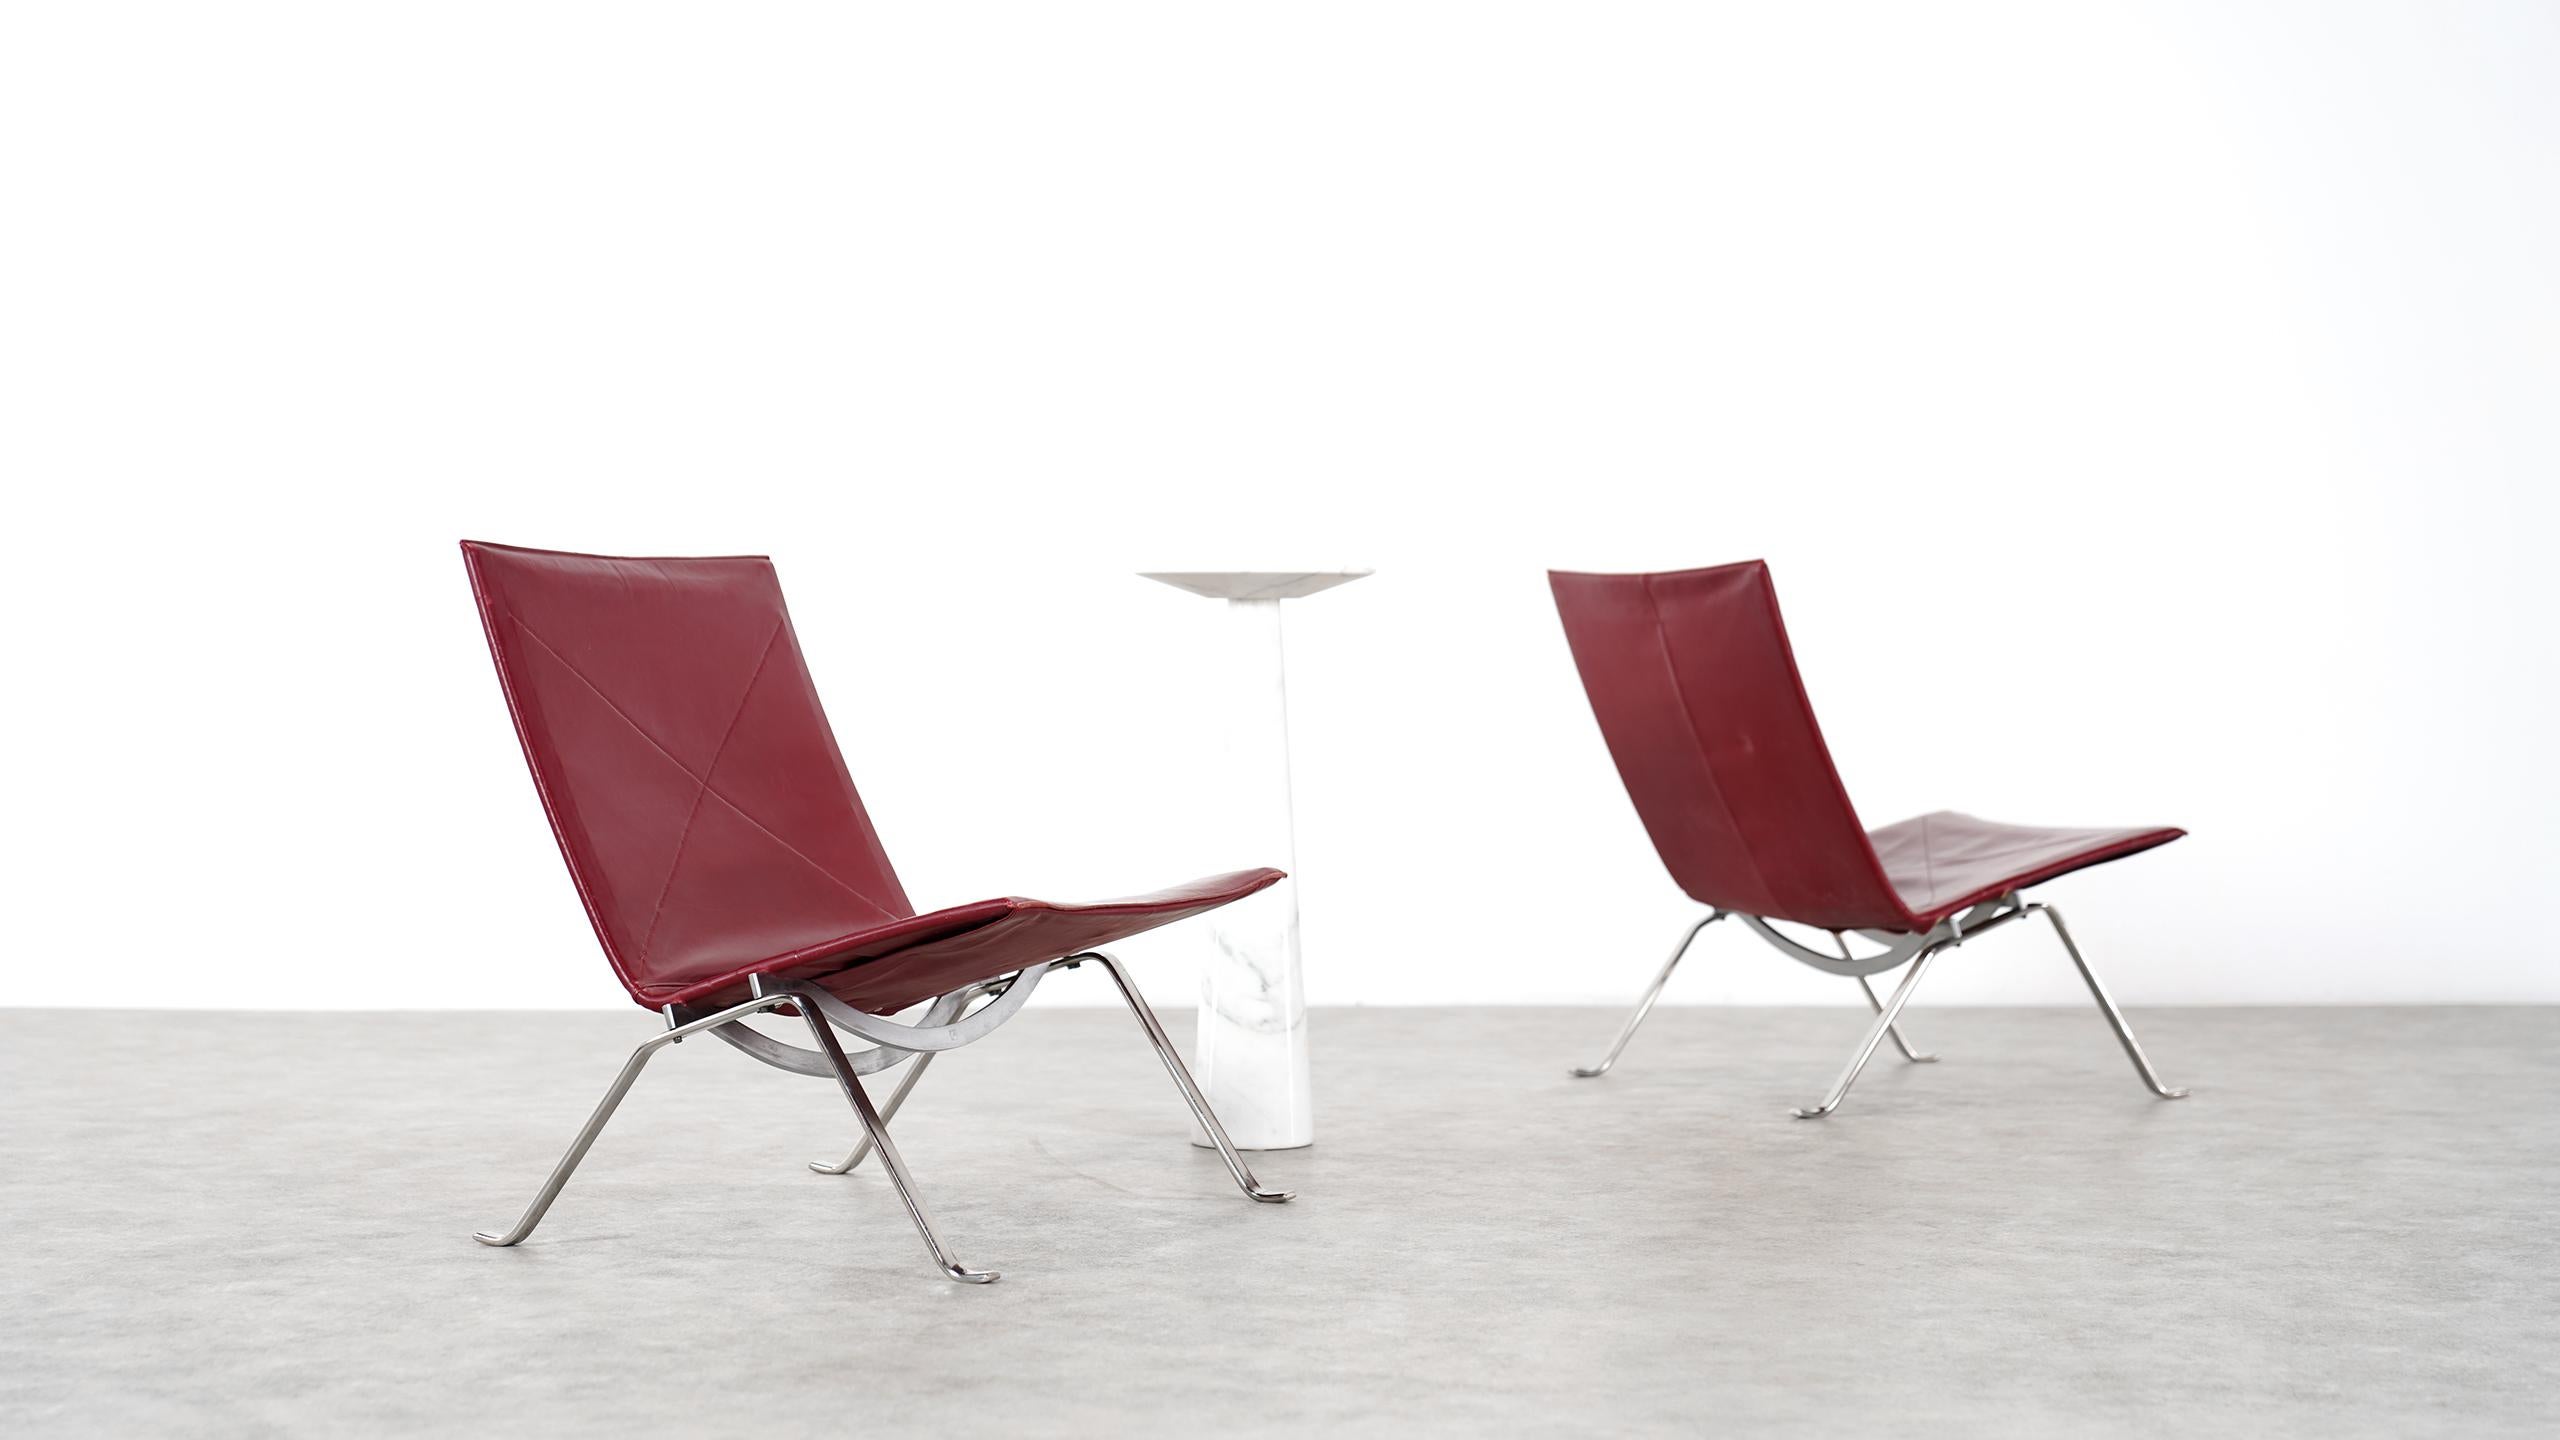 The discrete and elegant lounge chair PK22 epitomizes the work of Poul Kjærholm and his search for the ideal type-form and industrial dimension, which was always present in his work. 

This offer is for 2x PK22 lounge chairs with its smooth and very